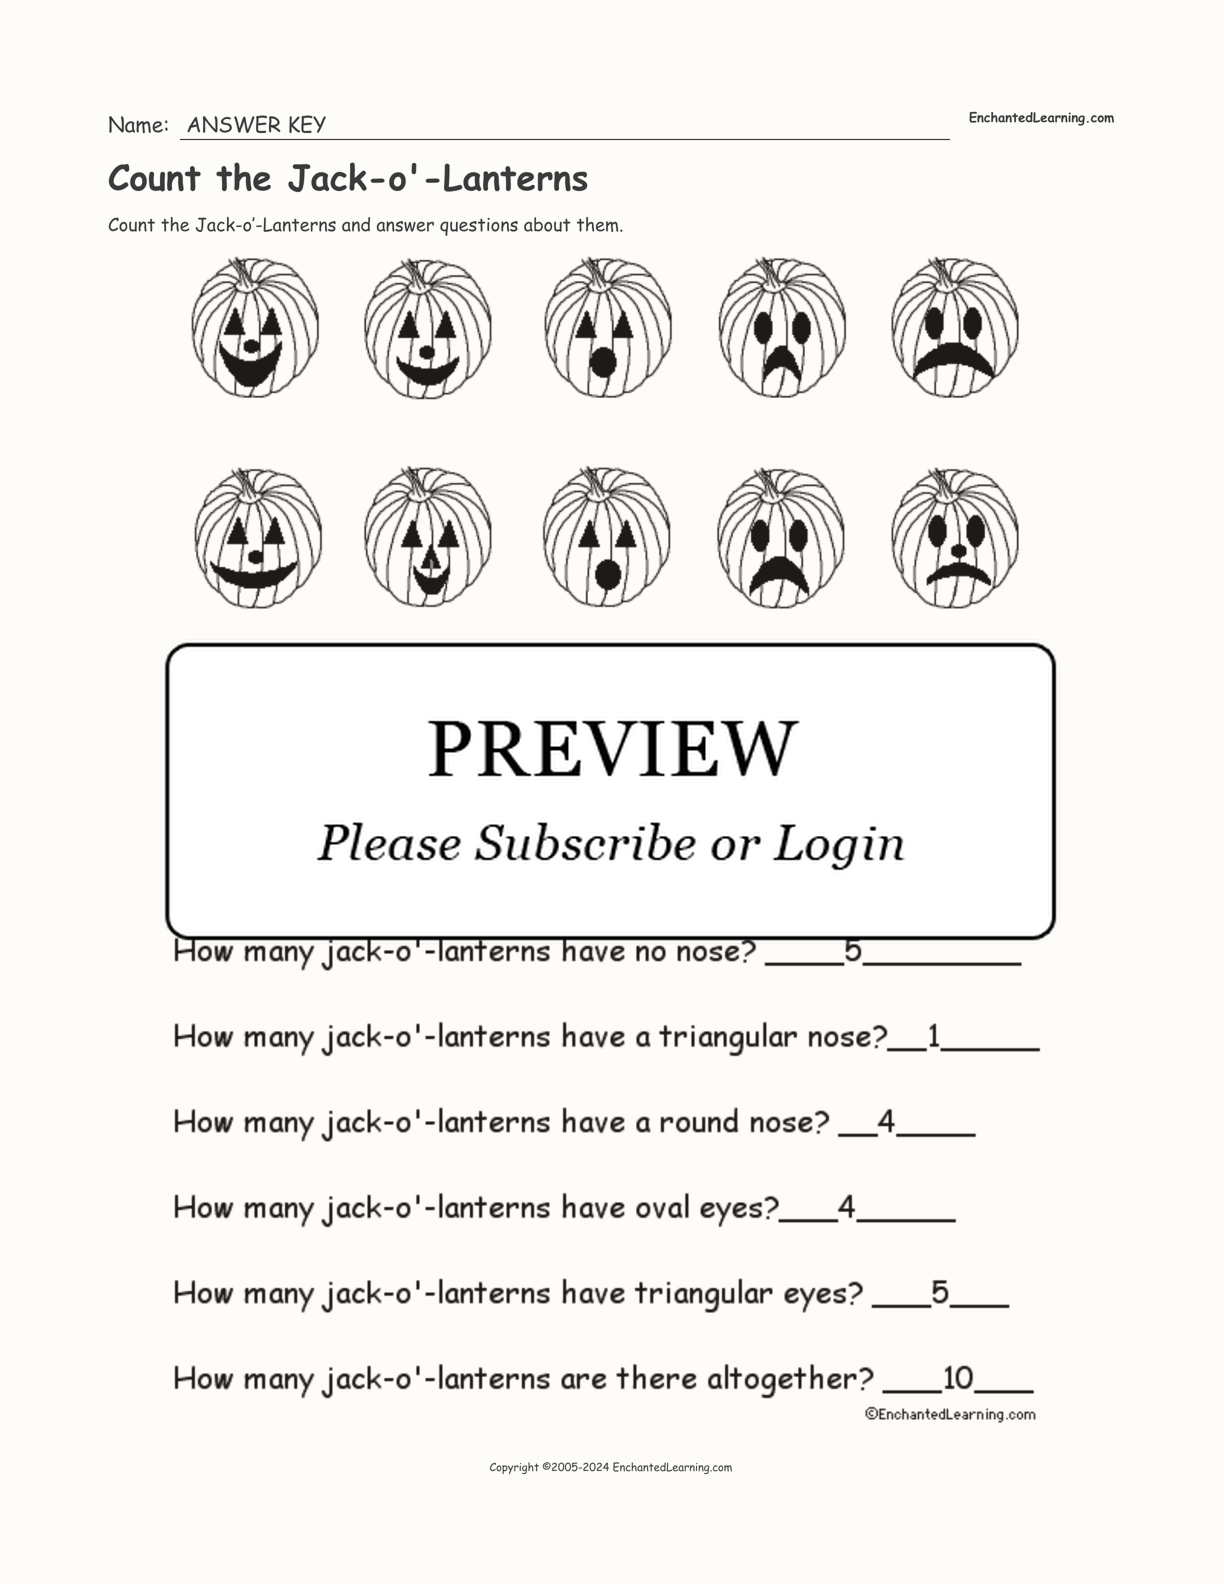 Count the Jack-o'-Lanterns interactive worksheet page 2